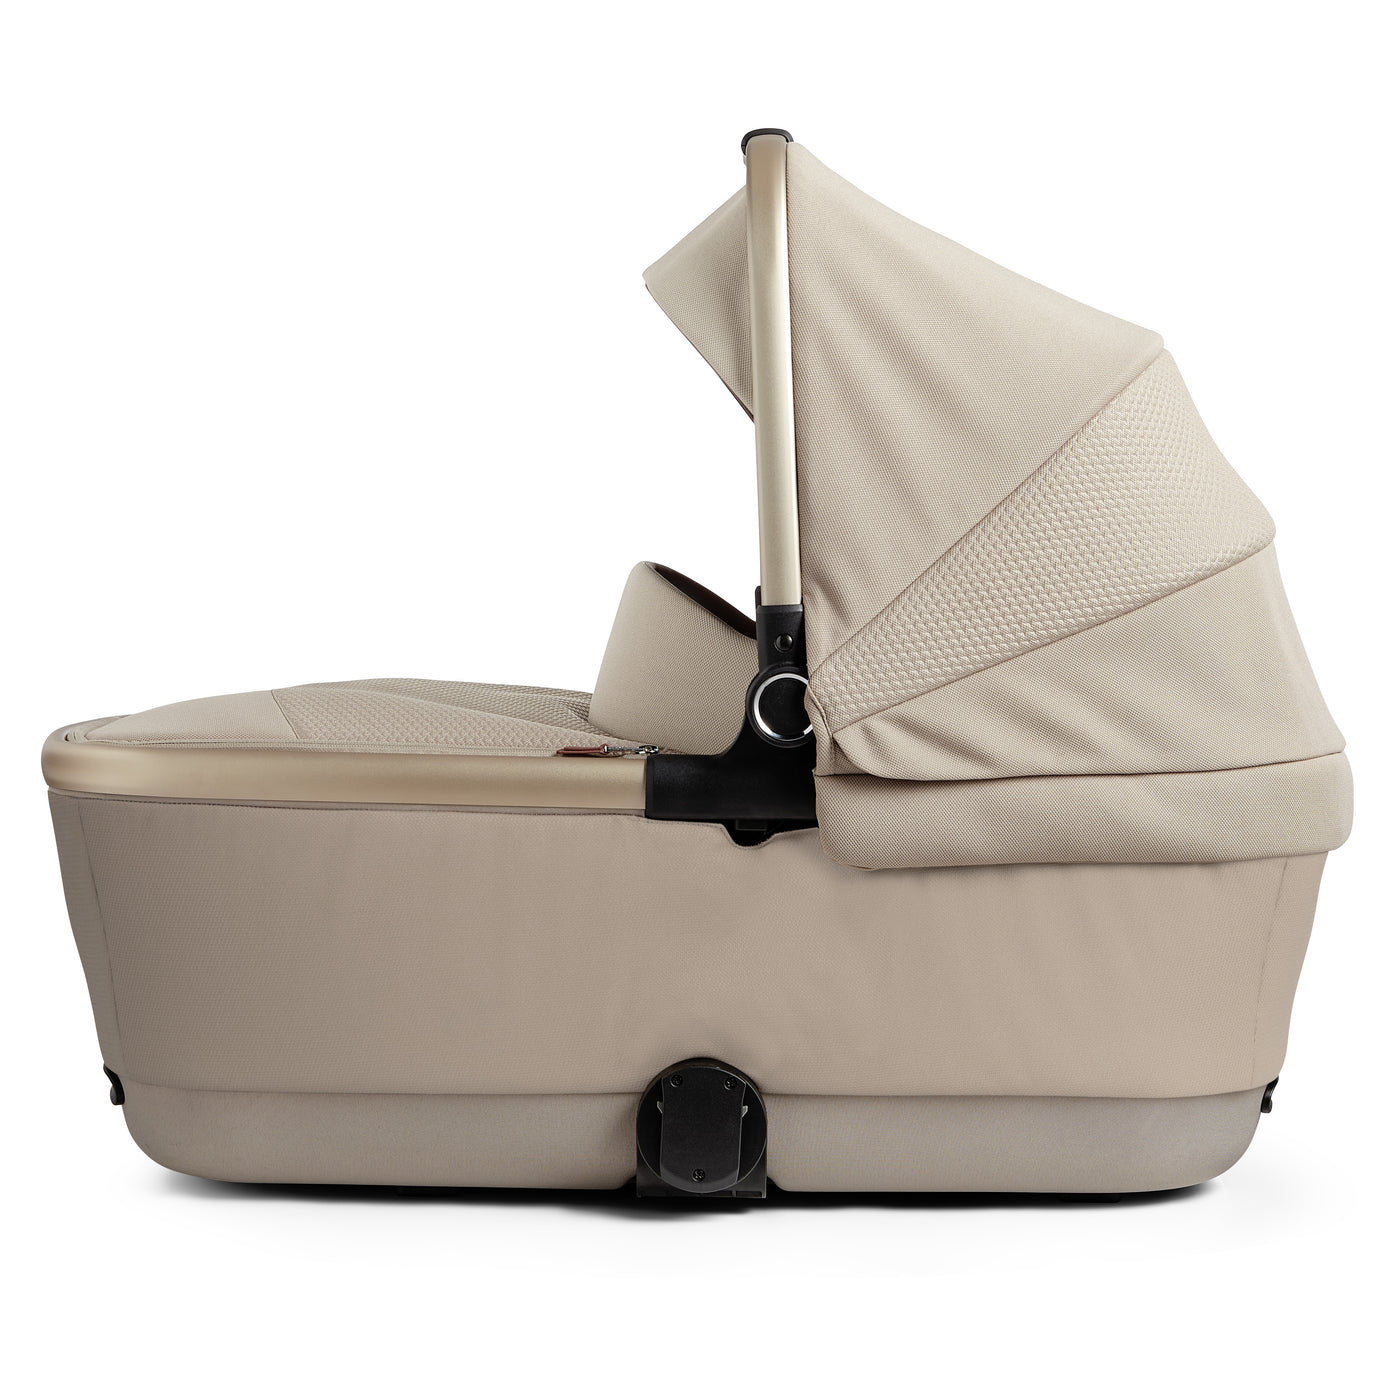 Silver Cross Reef Ultimate Bundle with First Bed Folding Carrycot - Stone